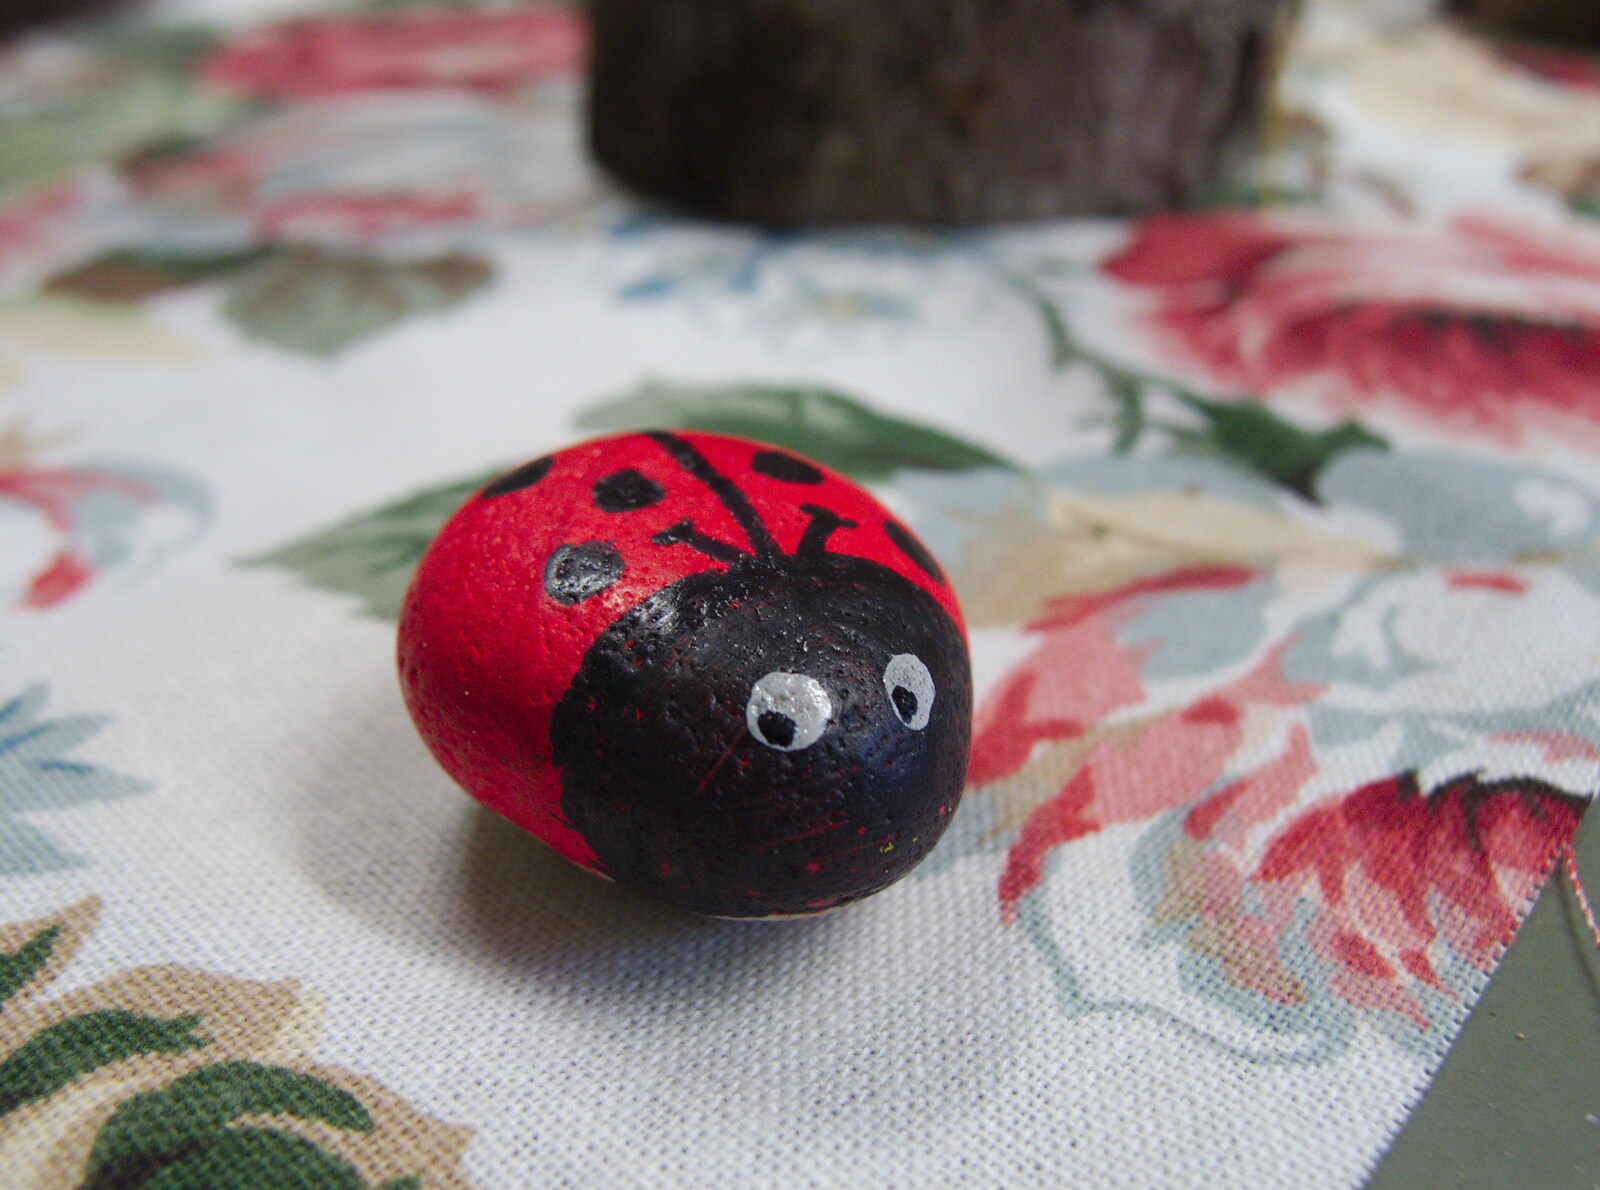 A stone ladybird from The BSCC at Gissing, Taxi Protests and Eye Scarecrows - 8th June 2019